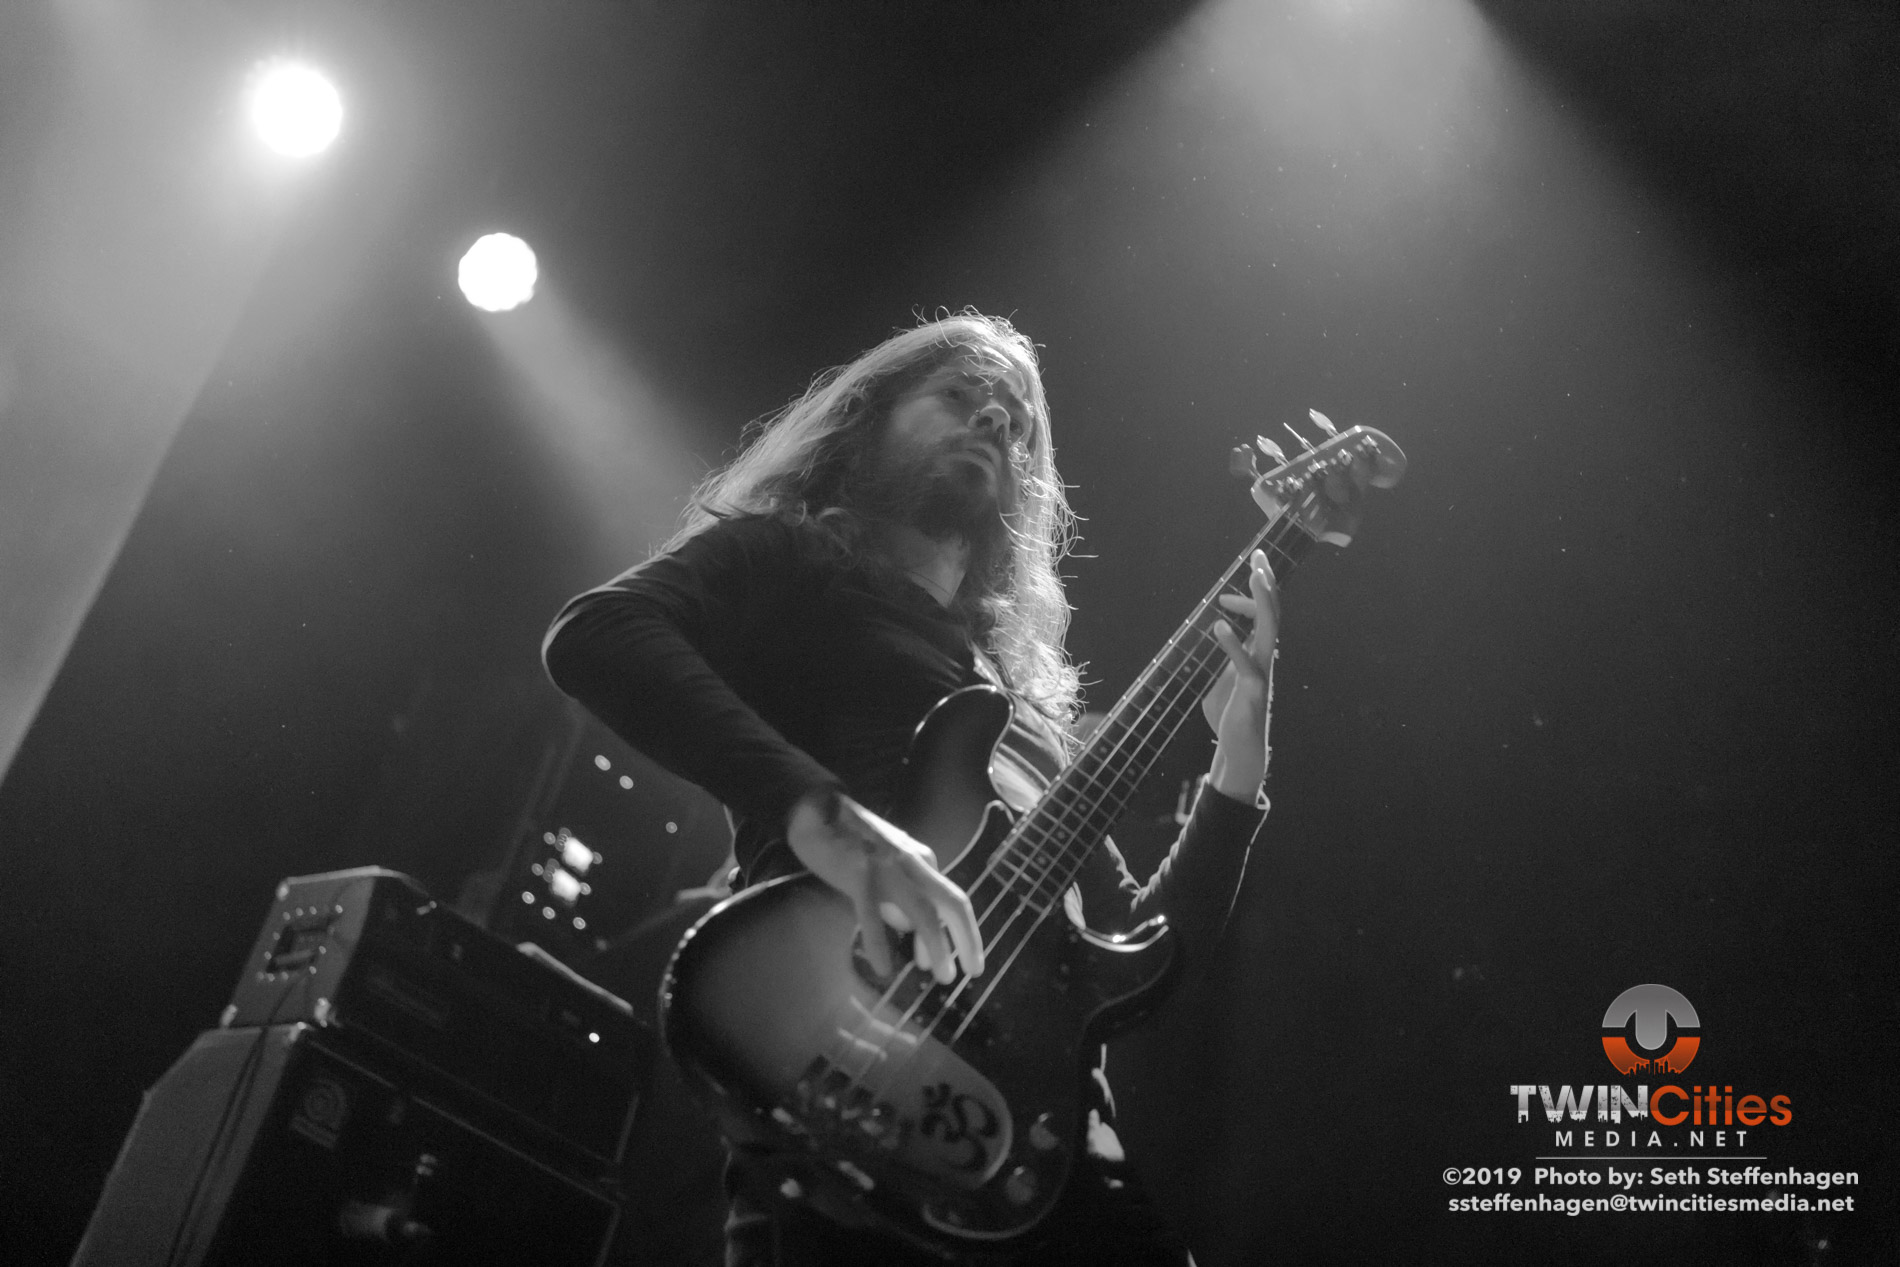 March 25, 2019 - Minneapolis, Minnesota, United States - Uncle Acid And The Deadbeats live in concert at First Avenue along with Graveyard and Demob Happy as the openers.

(Photo by Seth Steffenhagen/Steffenhagen Photography)